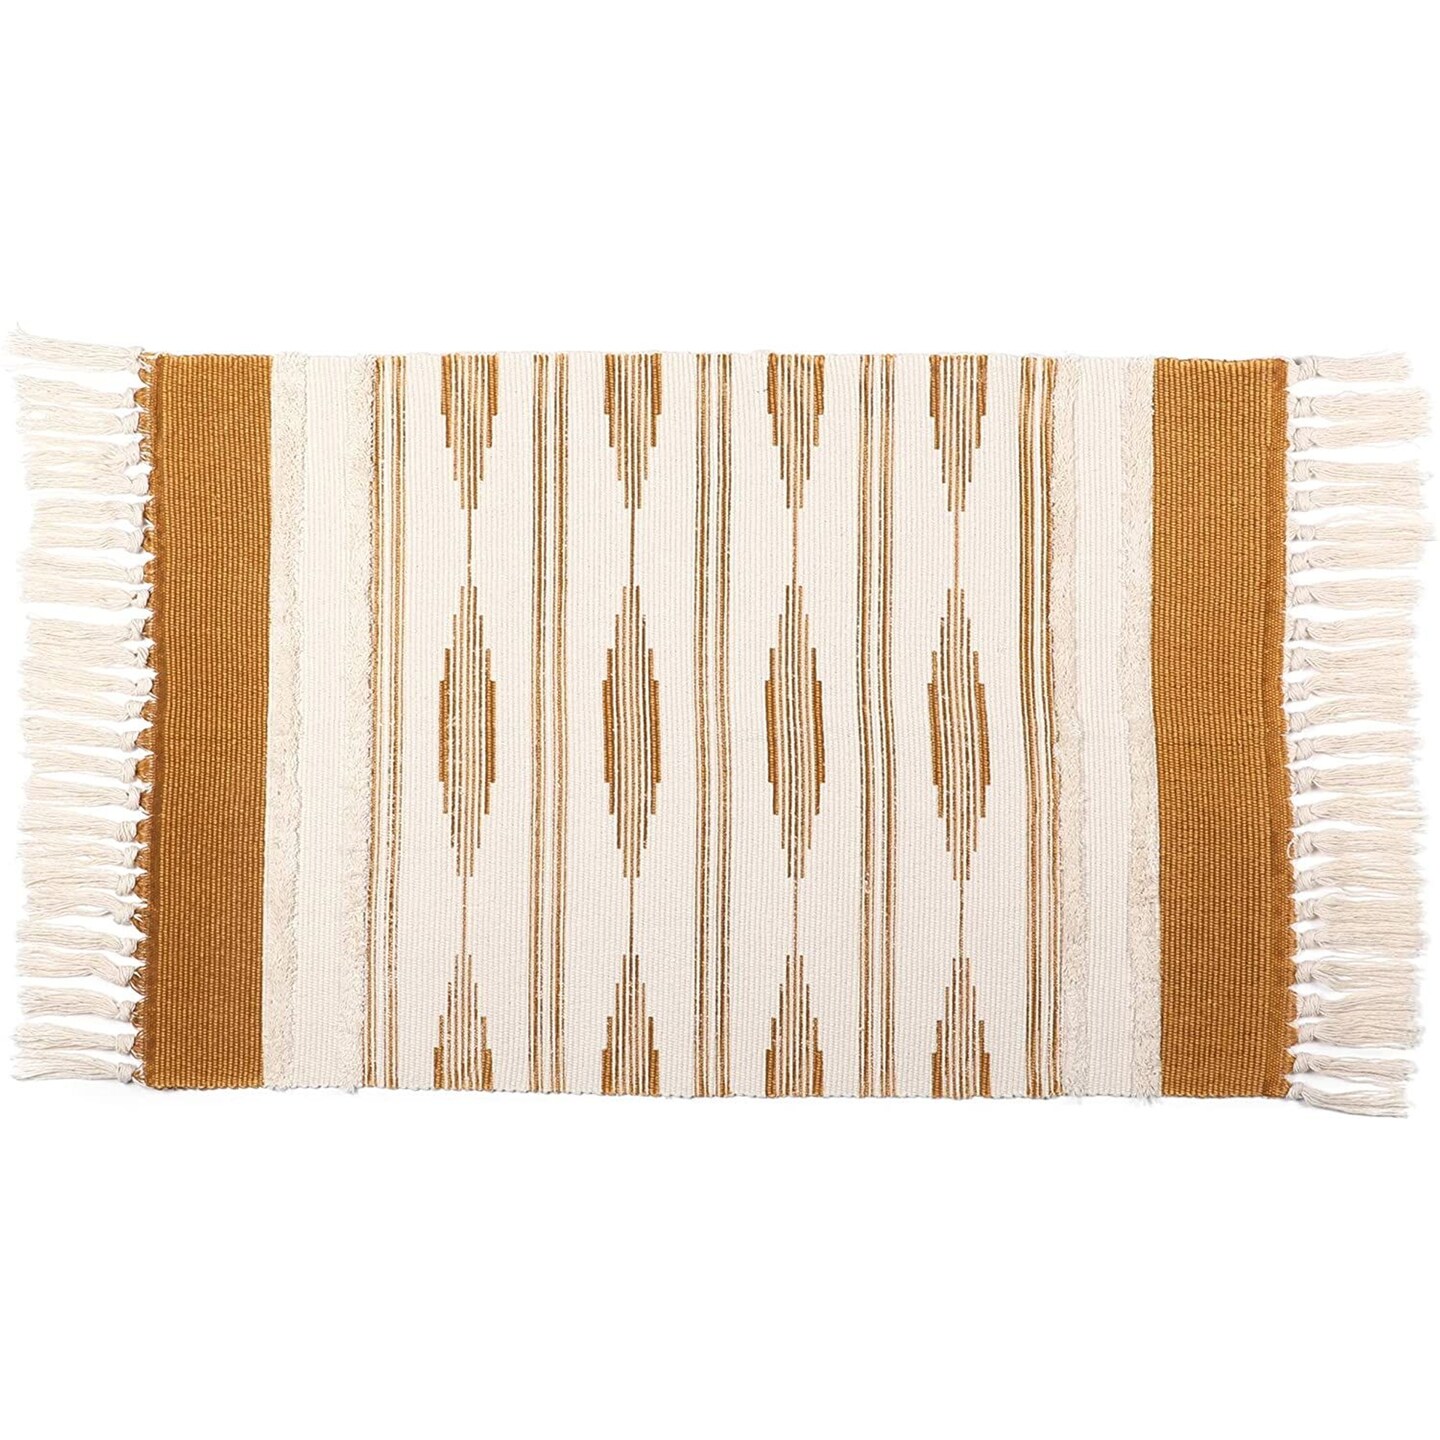 Yellow Bohemian Bathroom Rug with Tassels, Bohemian Style Mat (23.6 x 35 Inches)